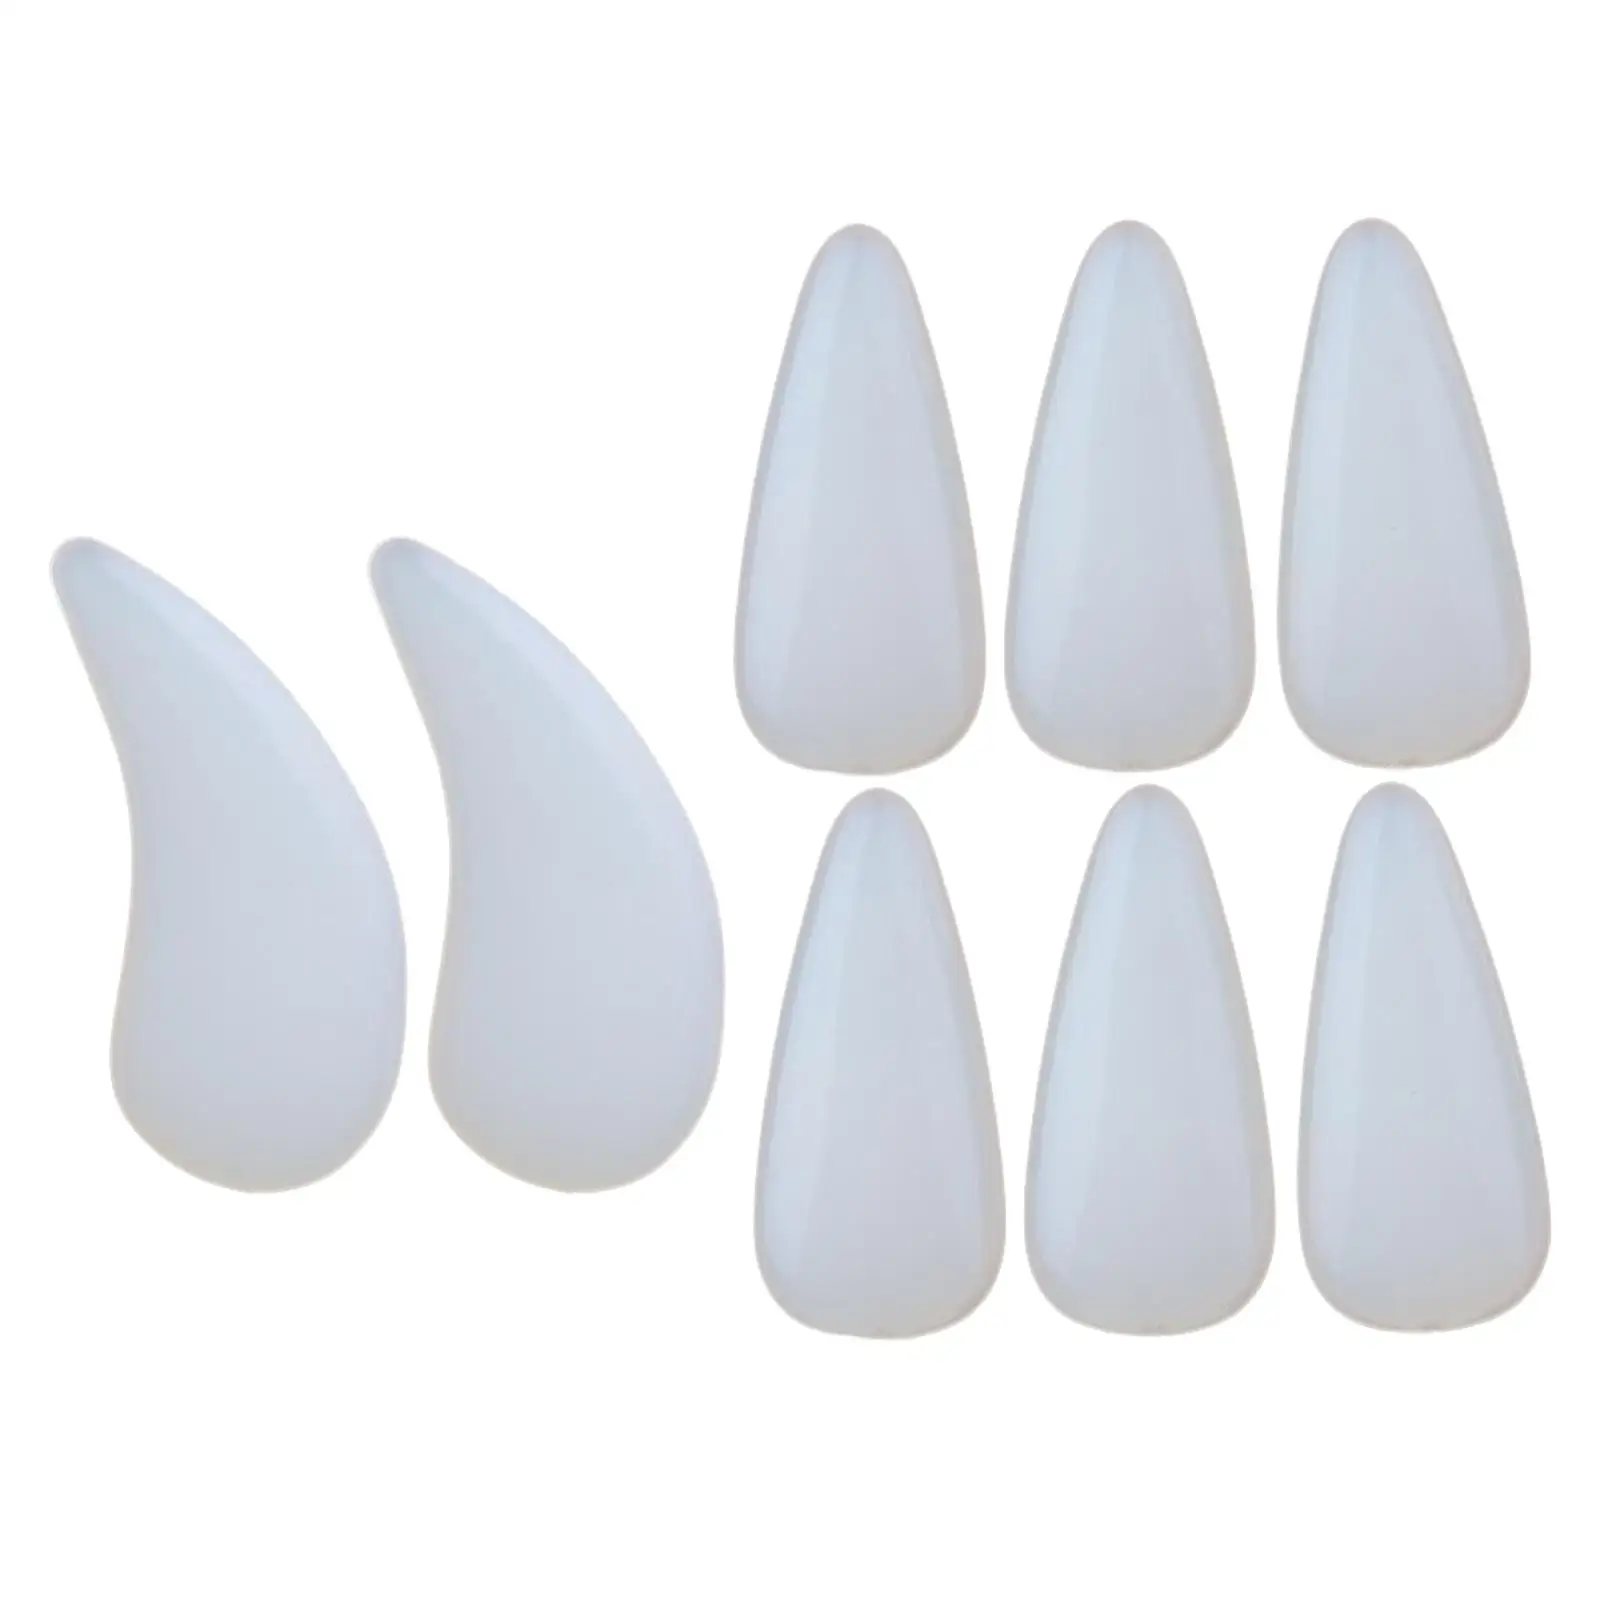 8x Durable Finger Pick Accessories Musical Instrument for Electric Guitar Bass Ukulele Banjo